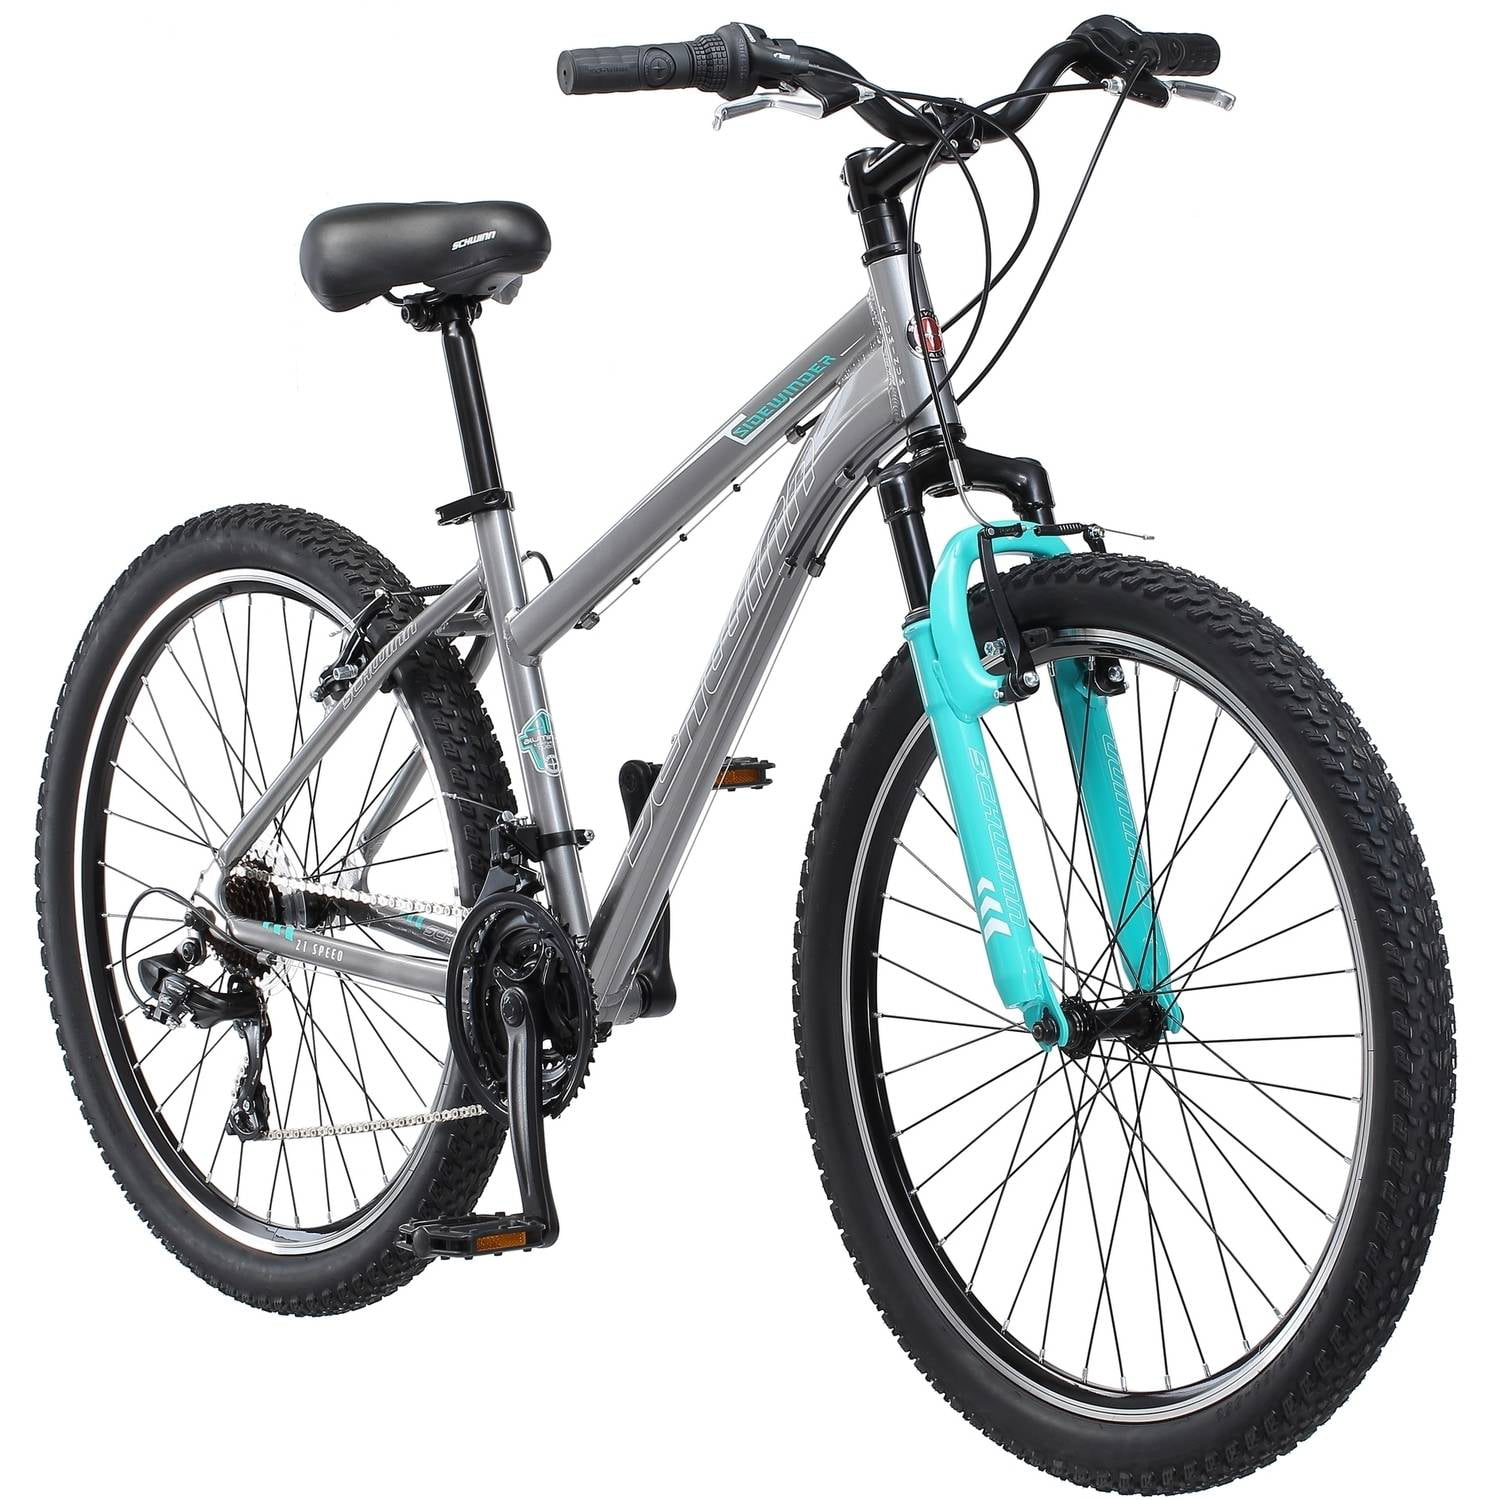 Are Walmart Bikes Good? — What You Should Know About Mass-Market Bikes ...